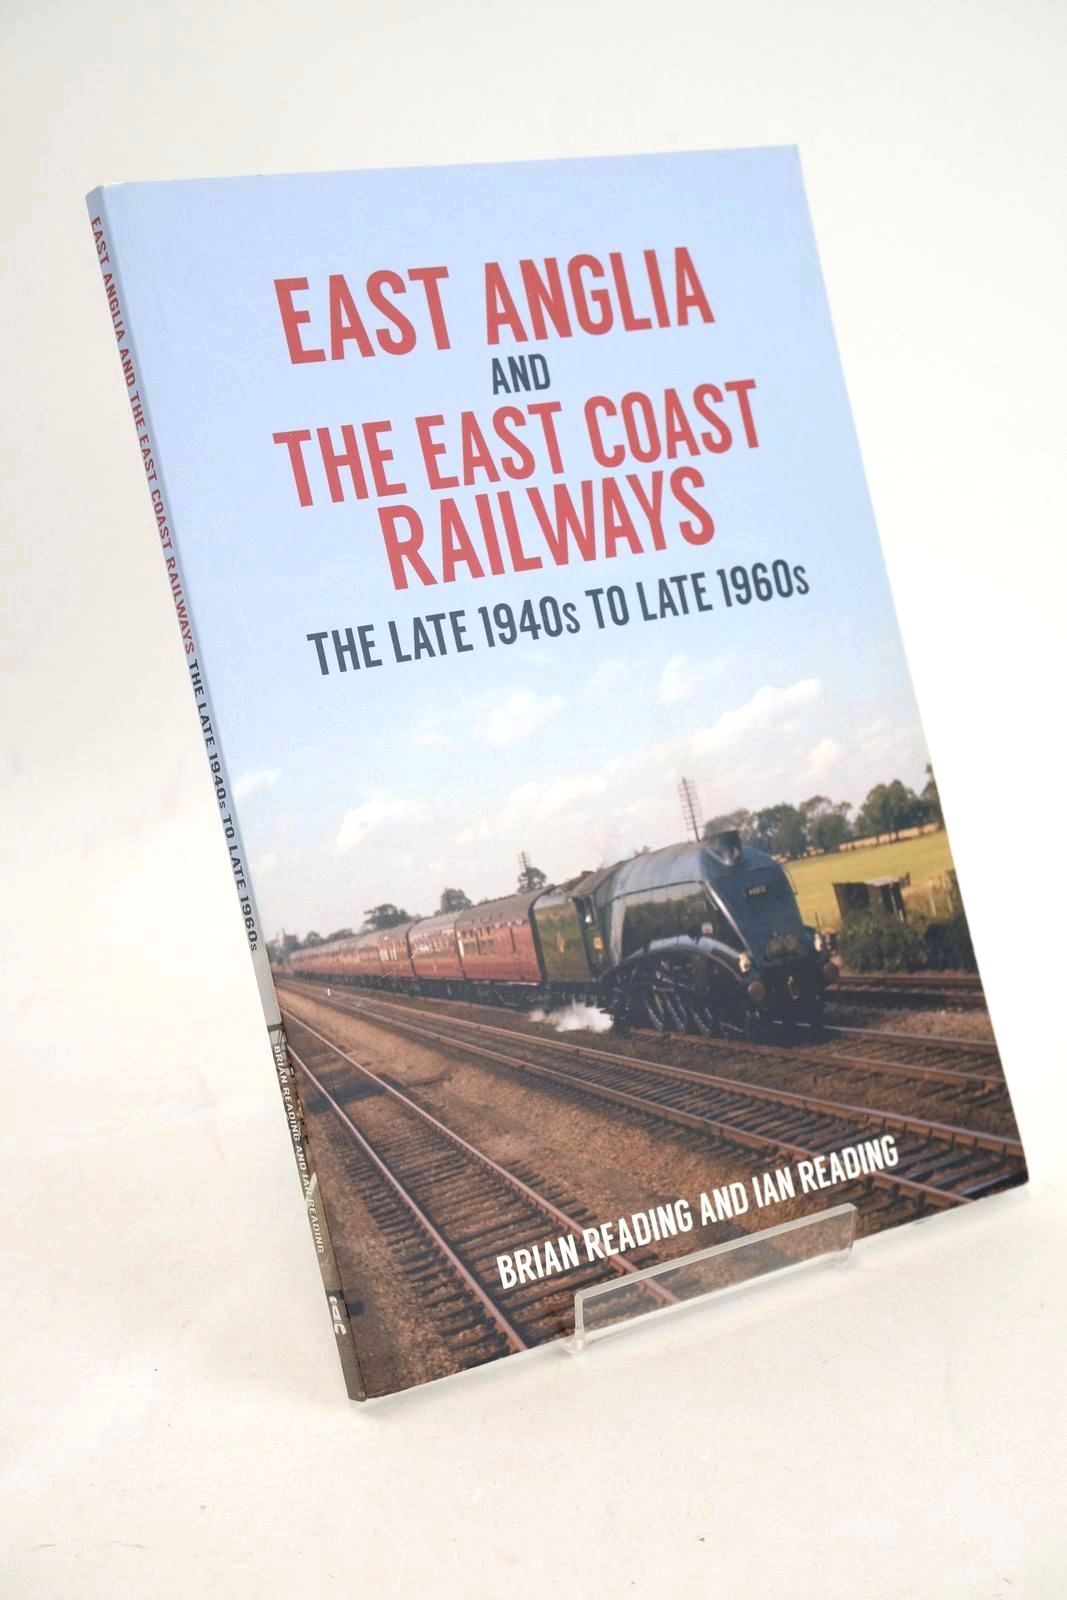 Photo of EAST ANGLIA AND THE EAST COAST RAILWAYS THE LATE 1940S TO LATE 1960S written by Reading, Brian Reading, Ian published by Amberley Publishing (STOCK CODE: 1327404)  for sale by Stella & Rose's Books